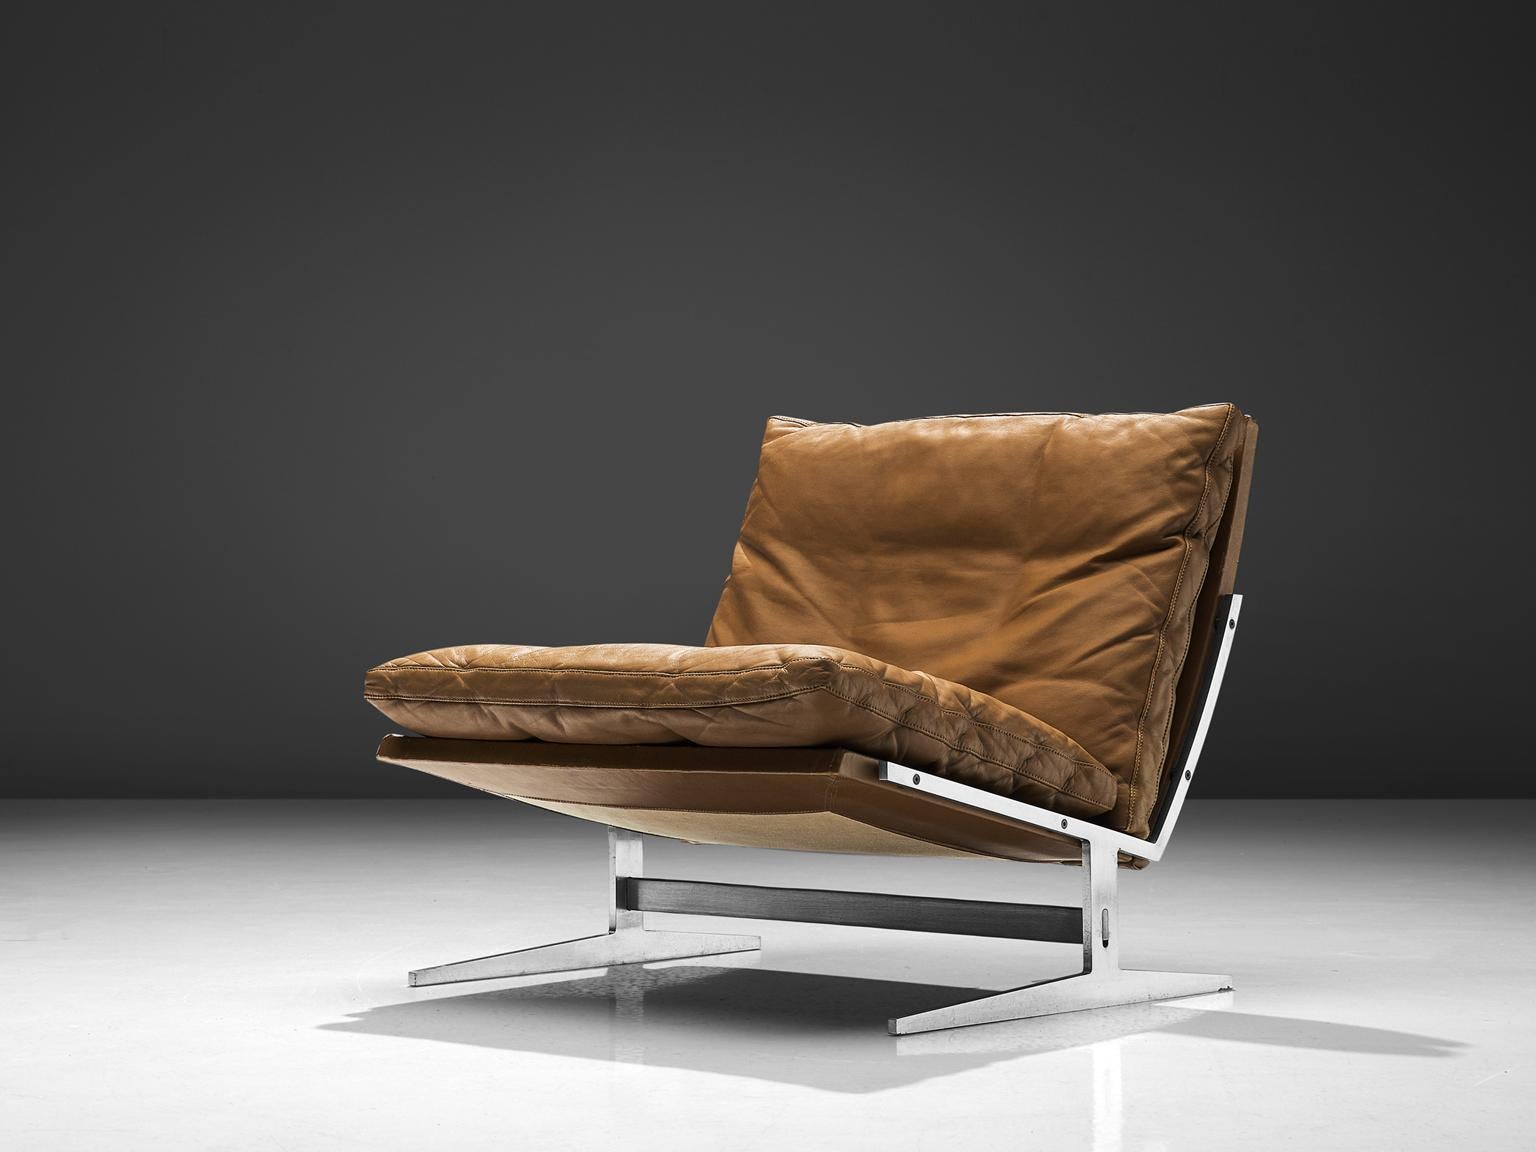 Preben Fabricius & Jørgen Kastholm, lounge chair model BO561, brushed steel and brown leather, Denmark, 1962. 

This modern slipper chair is executed in steel and leather. This chair holds an L-shaped seating. This shape is repeated in the legs. A